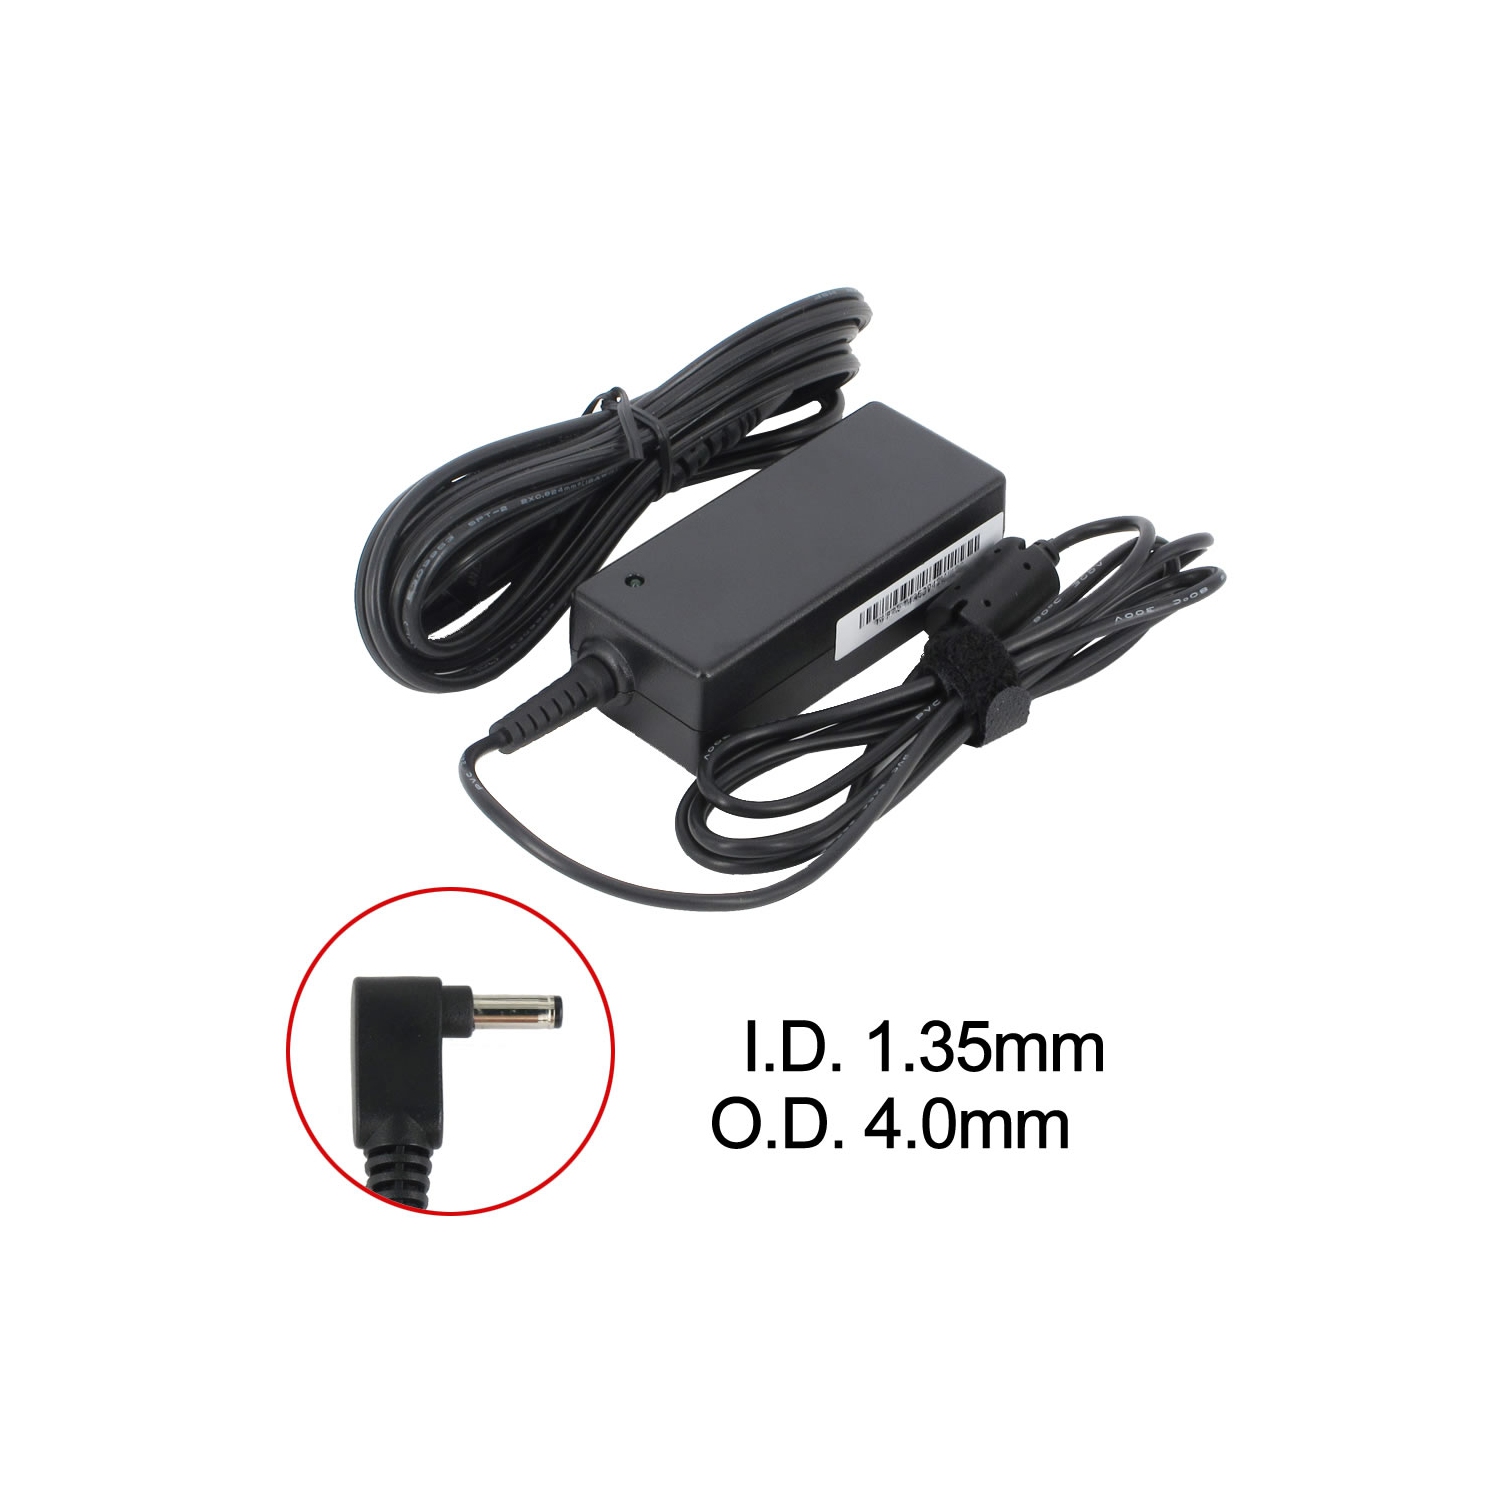 BattDepot: New Laptop AC Adapter for Asus VivoBook Max X541UA, 0A001-00230300, 0A001-00233100, EXA1206CH, W15-065N1A